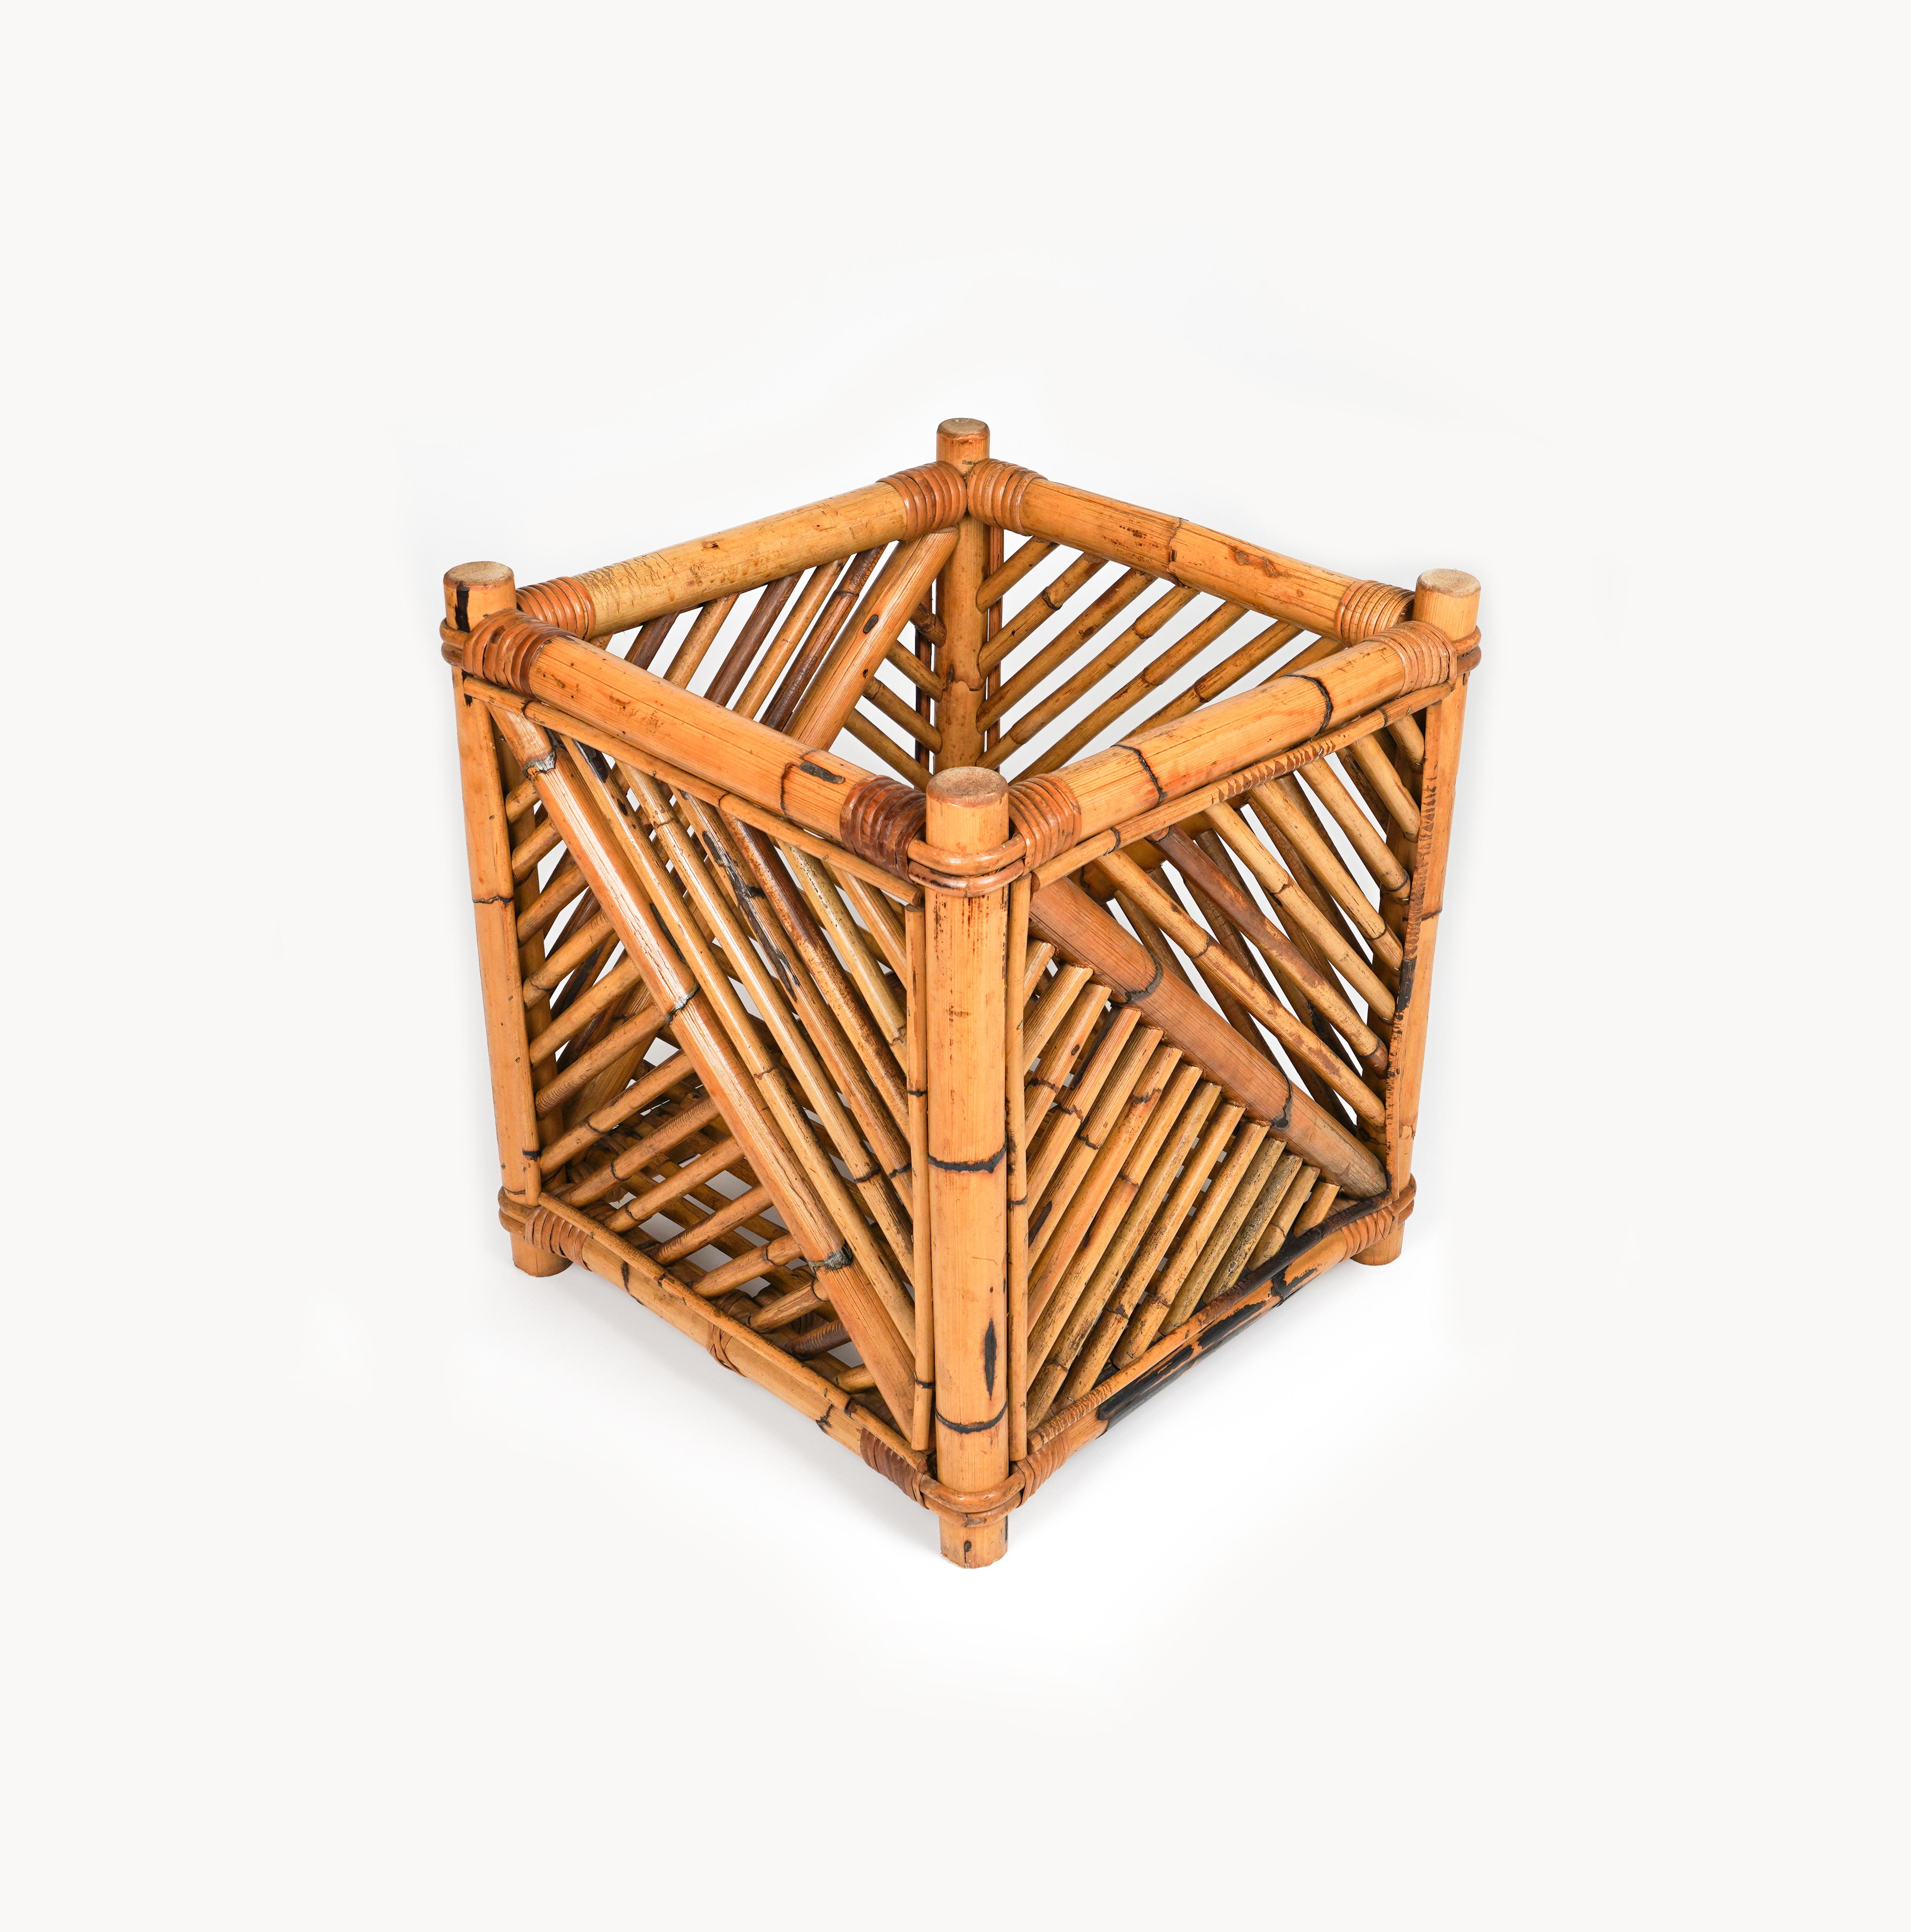 Mid-Century Modern Rattan and Bamboo Plant Holder or Basket by Vivai Del Sud, Italy 1970s For Sale